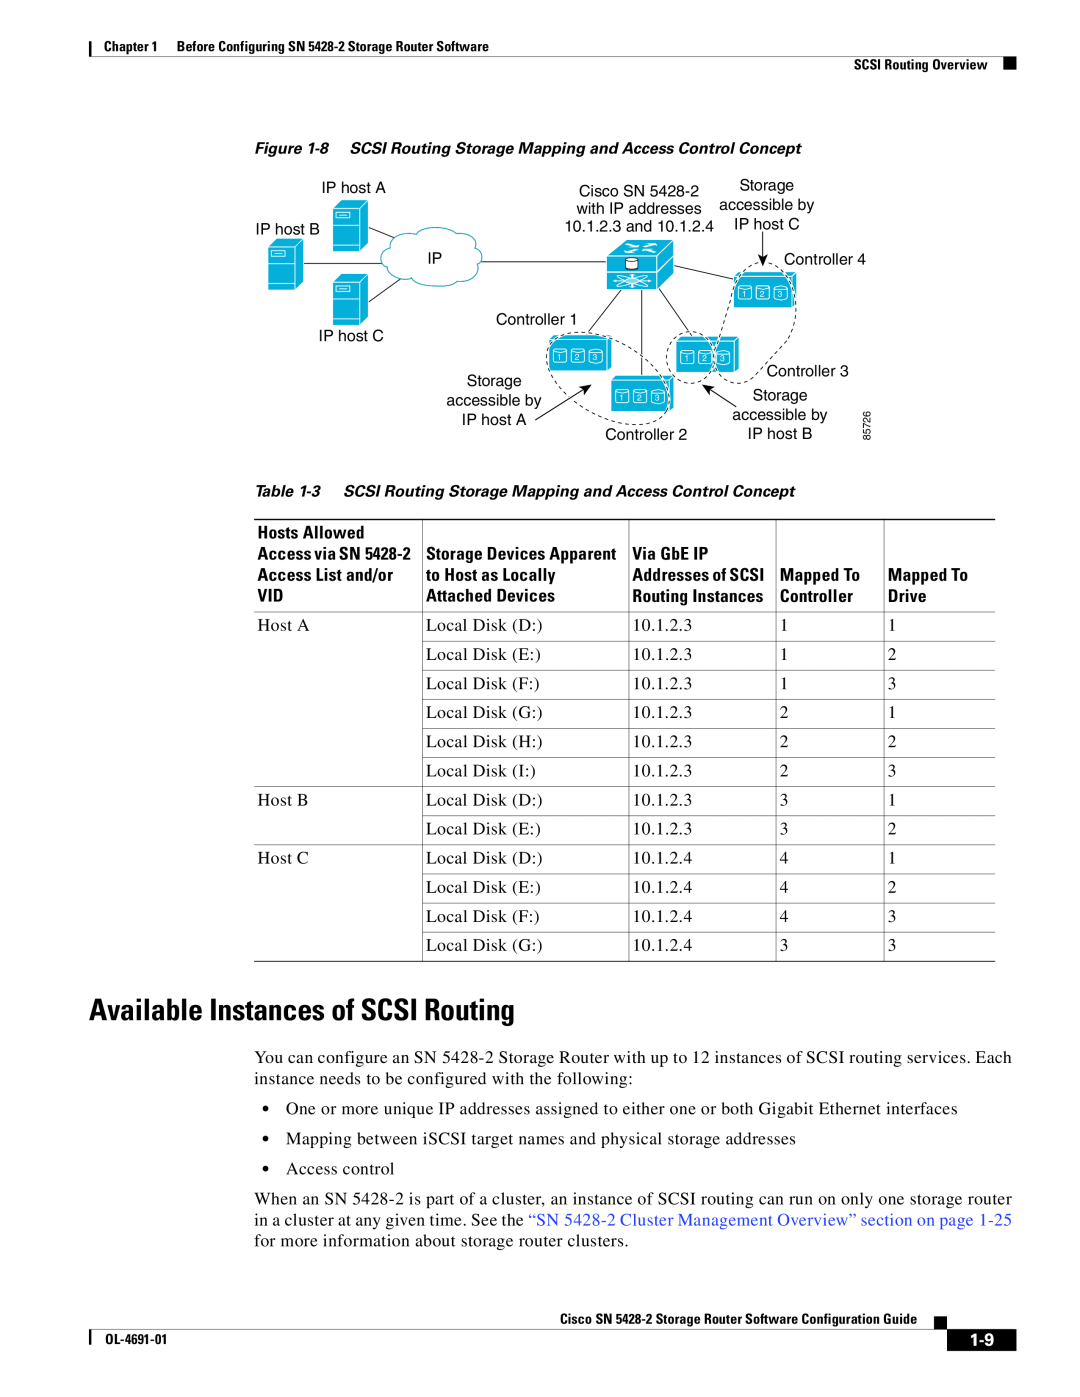 Cisco Systems SN 5428-2 Available Instances of SCSI Routing, 8 SCSI Routing Storage Mapping and Access Control Concept 